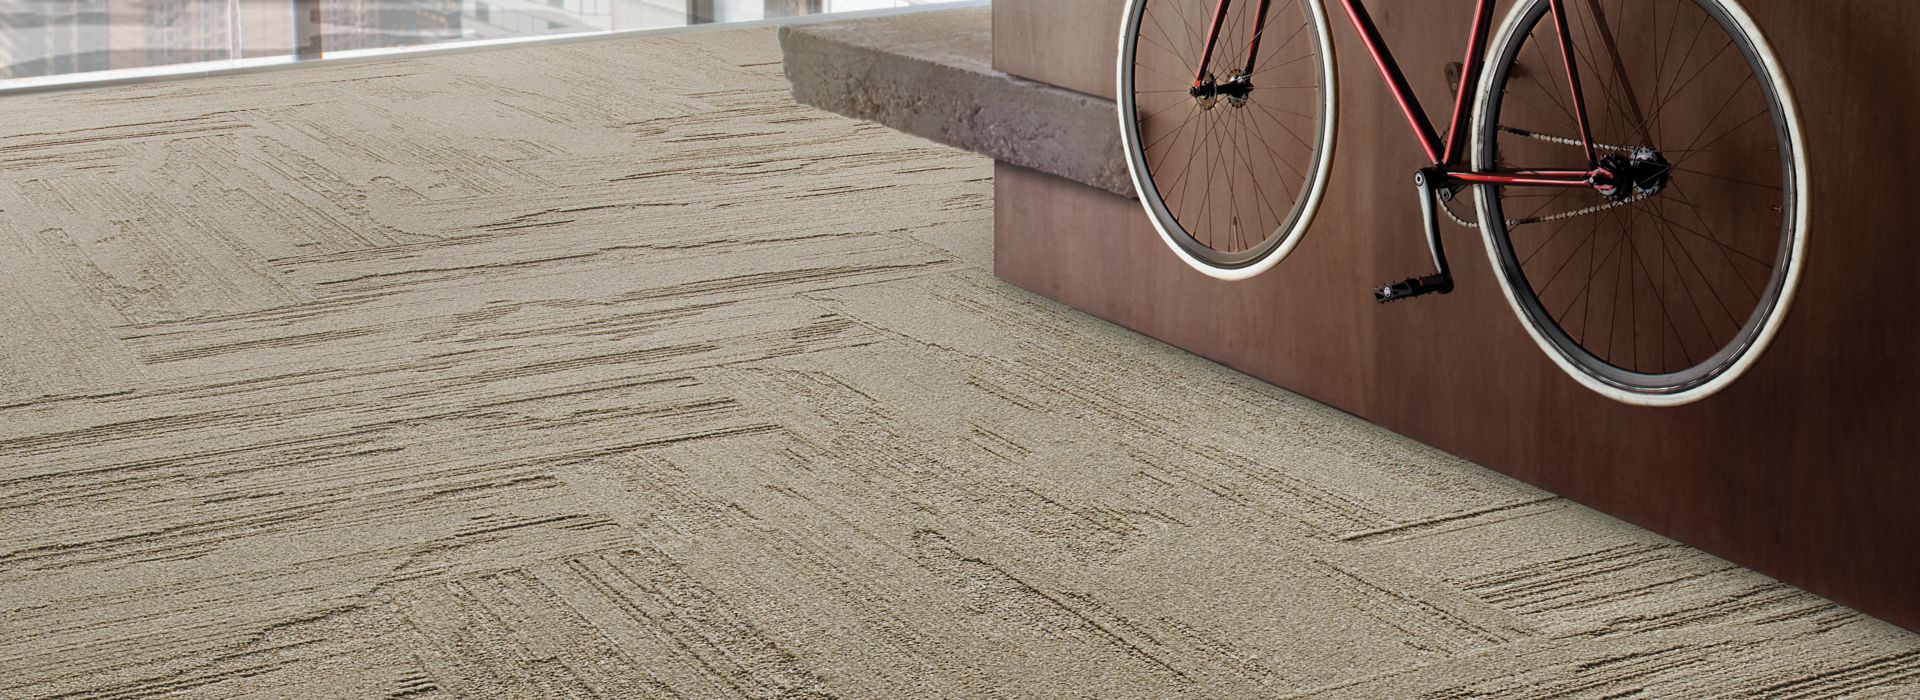 Interface UR501 plank carpet tile in office common area with bike 